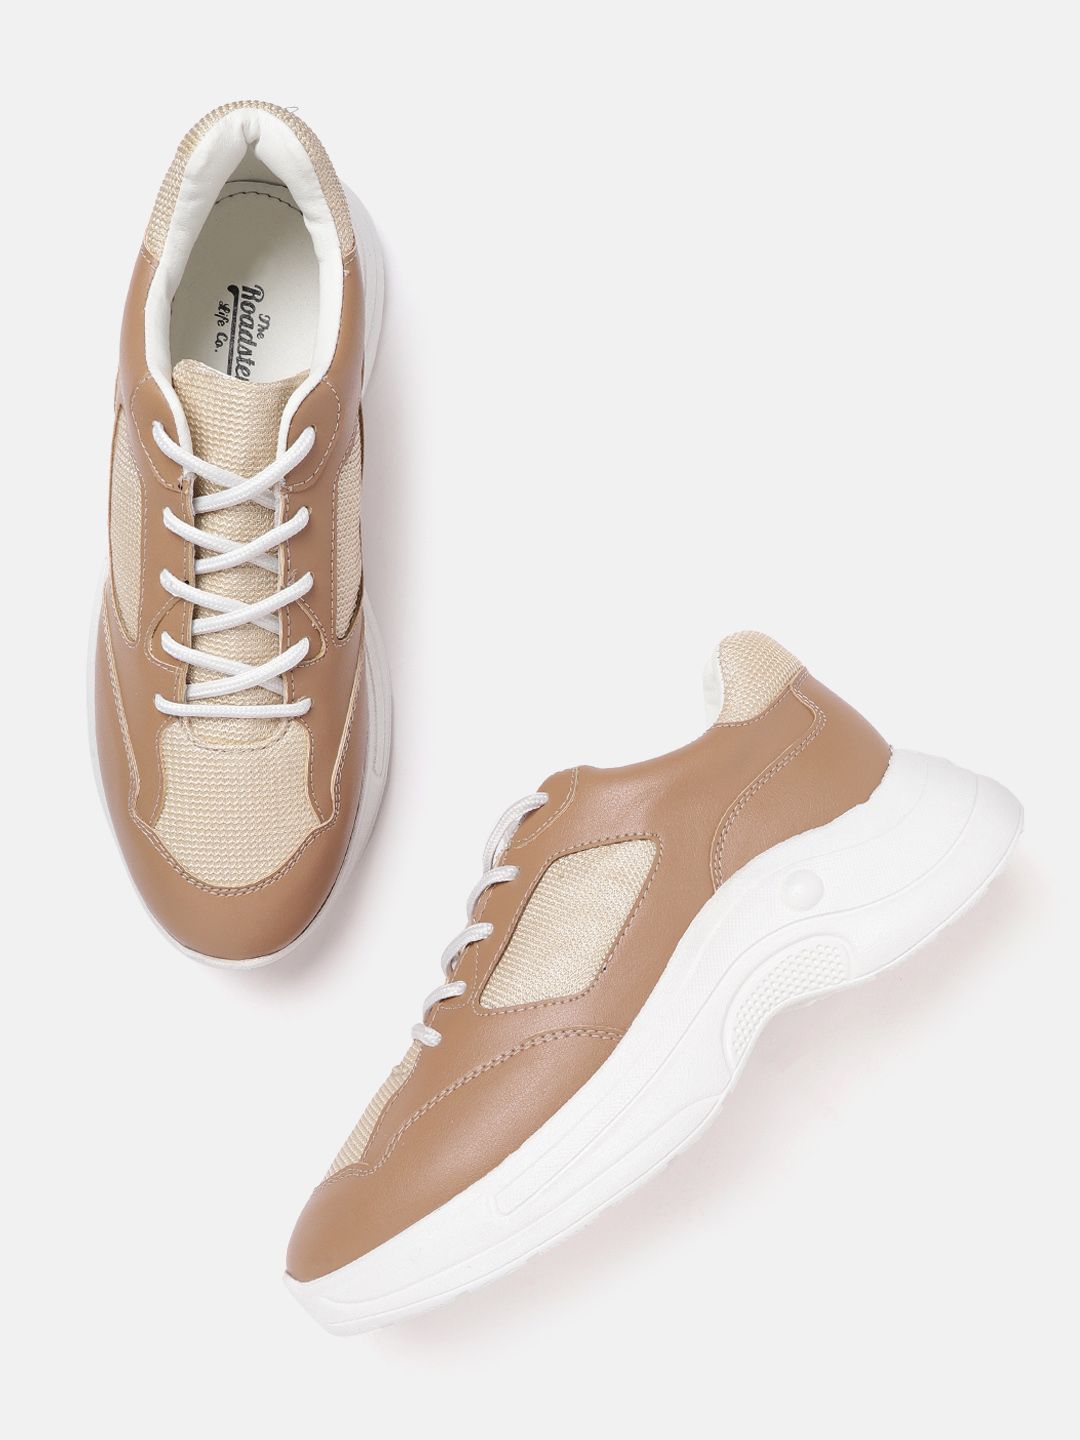 Roadster Women Beige & Cream-Coloured Colourblocked Chunky Sneakers Price in India